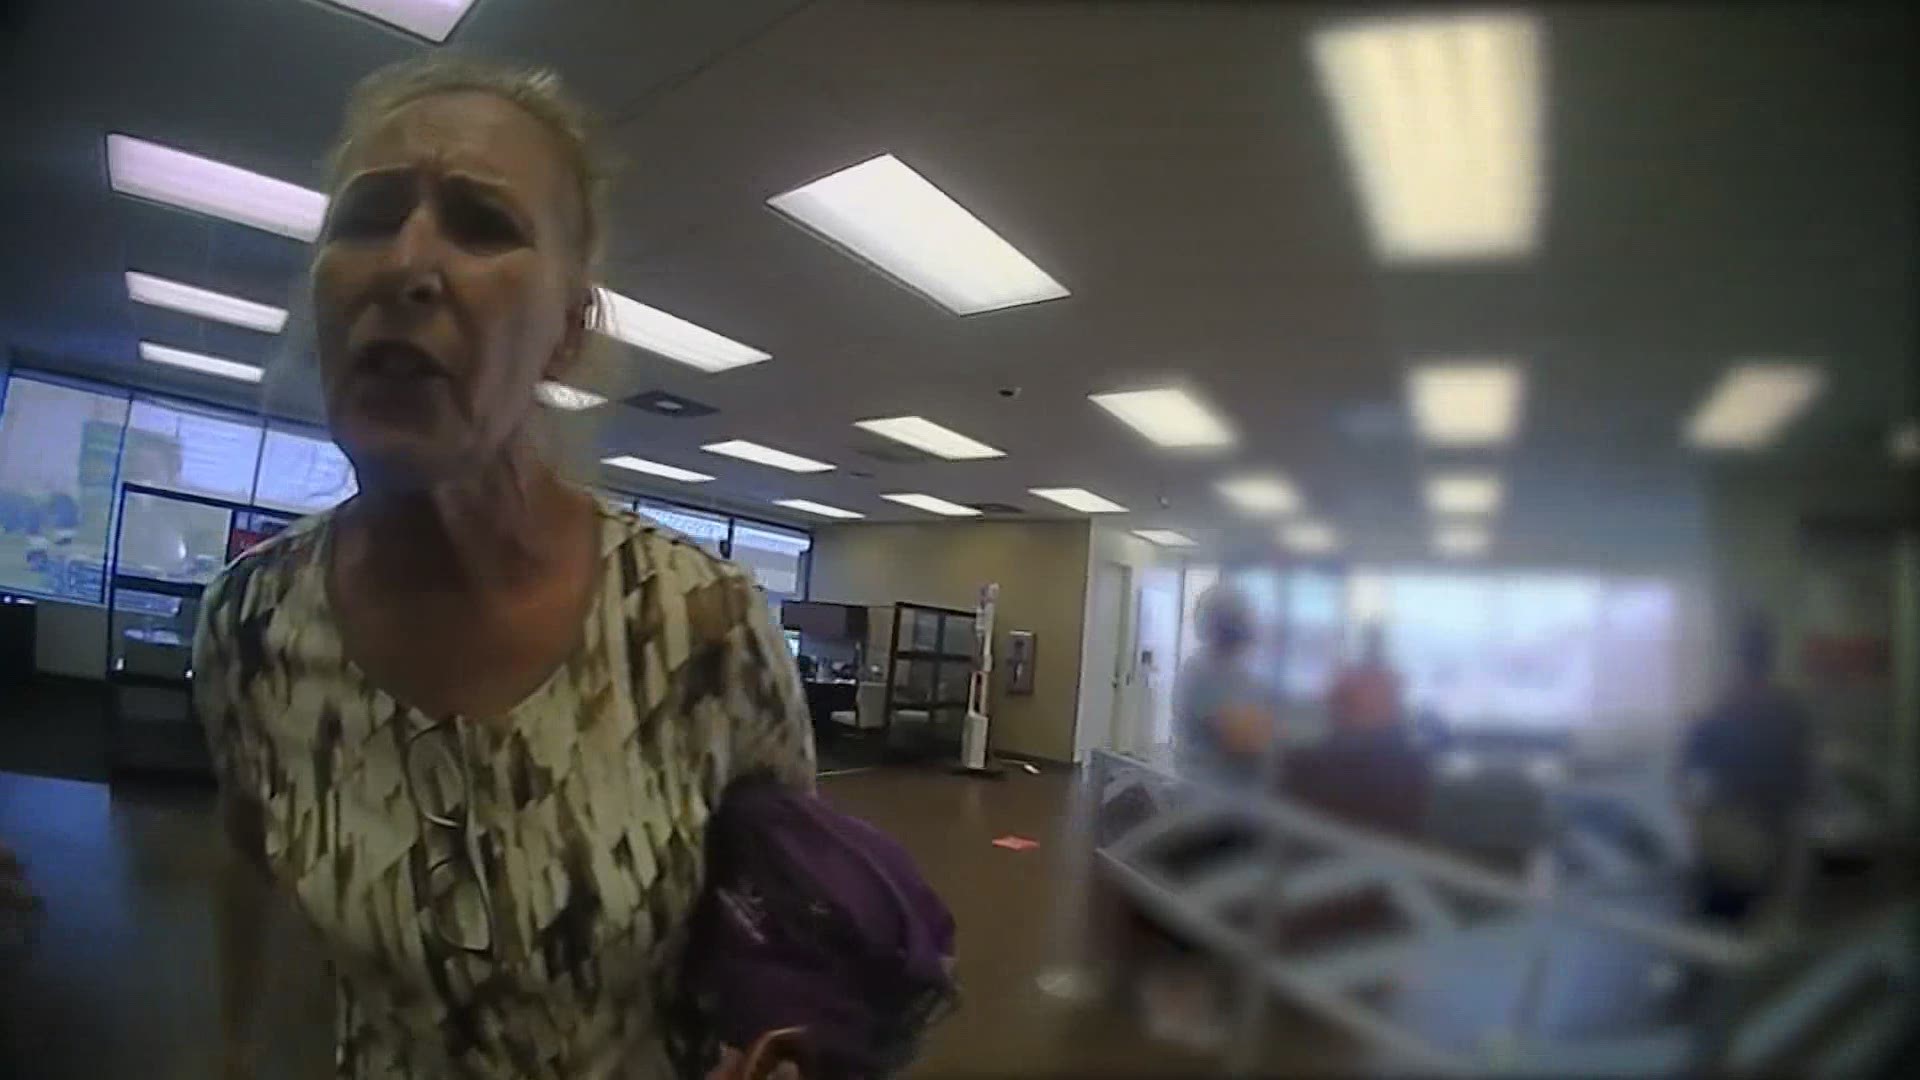 A woman was accused of criminal trespass and resisting arrest after police say she refused to wear a mask inside a Galveston bank Thursday.